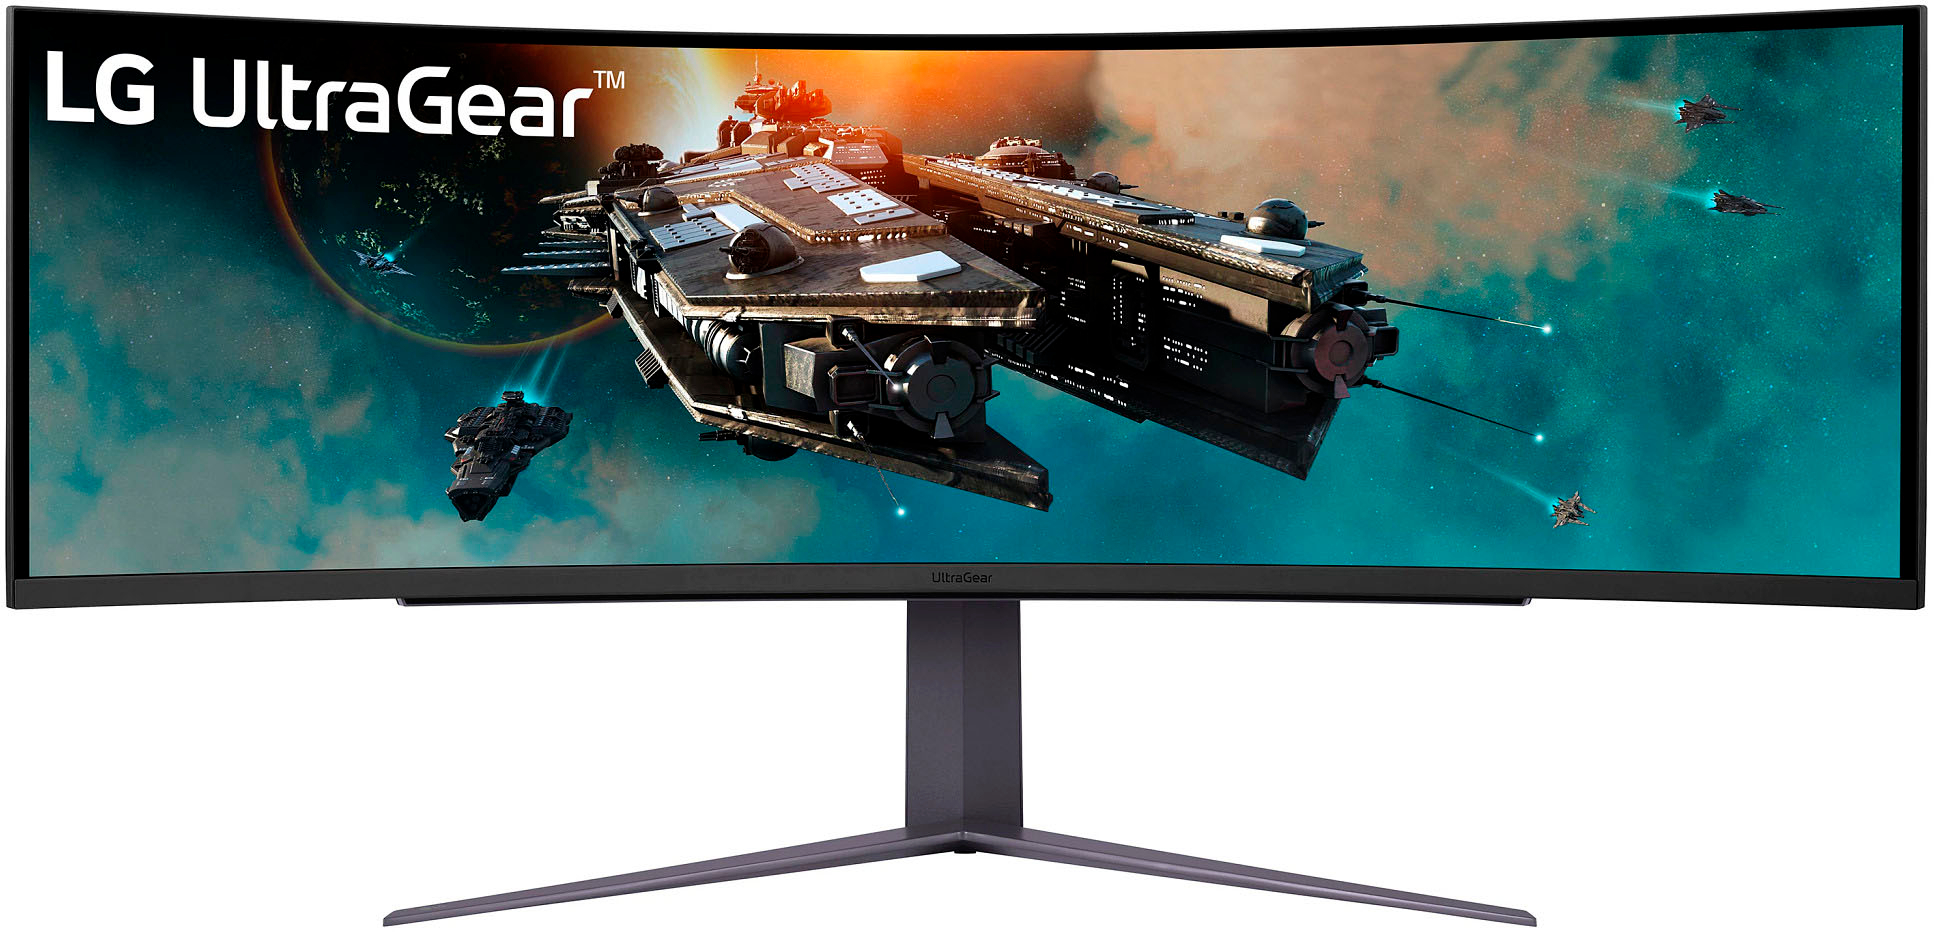 LG UltraWide QHD 34-Inch Curved Computer Monitor 34WQ73A-B, IPS with HDR 10  Compatibility, Built-In KVM, and USB Type-C, Black 